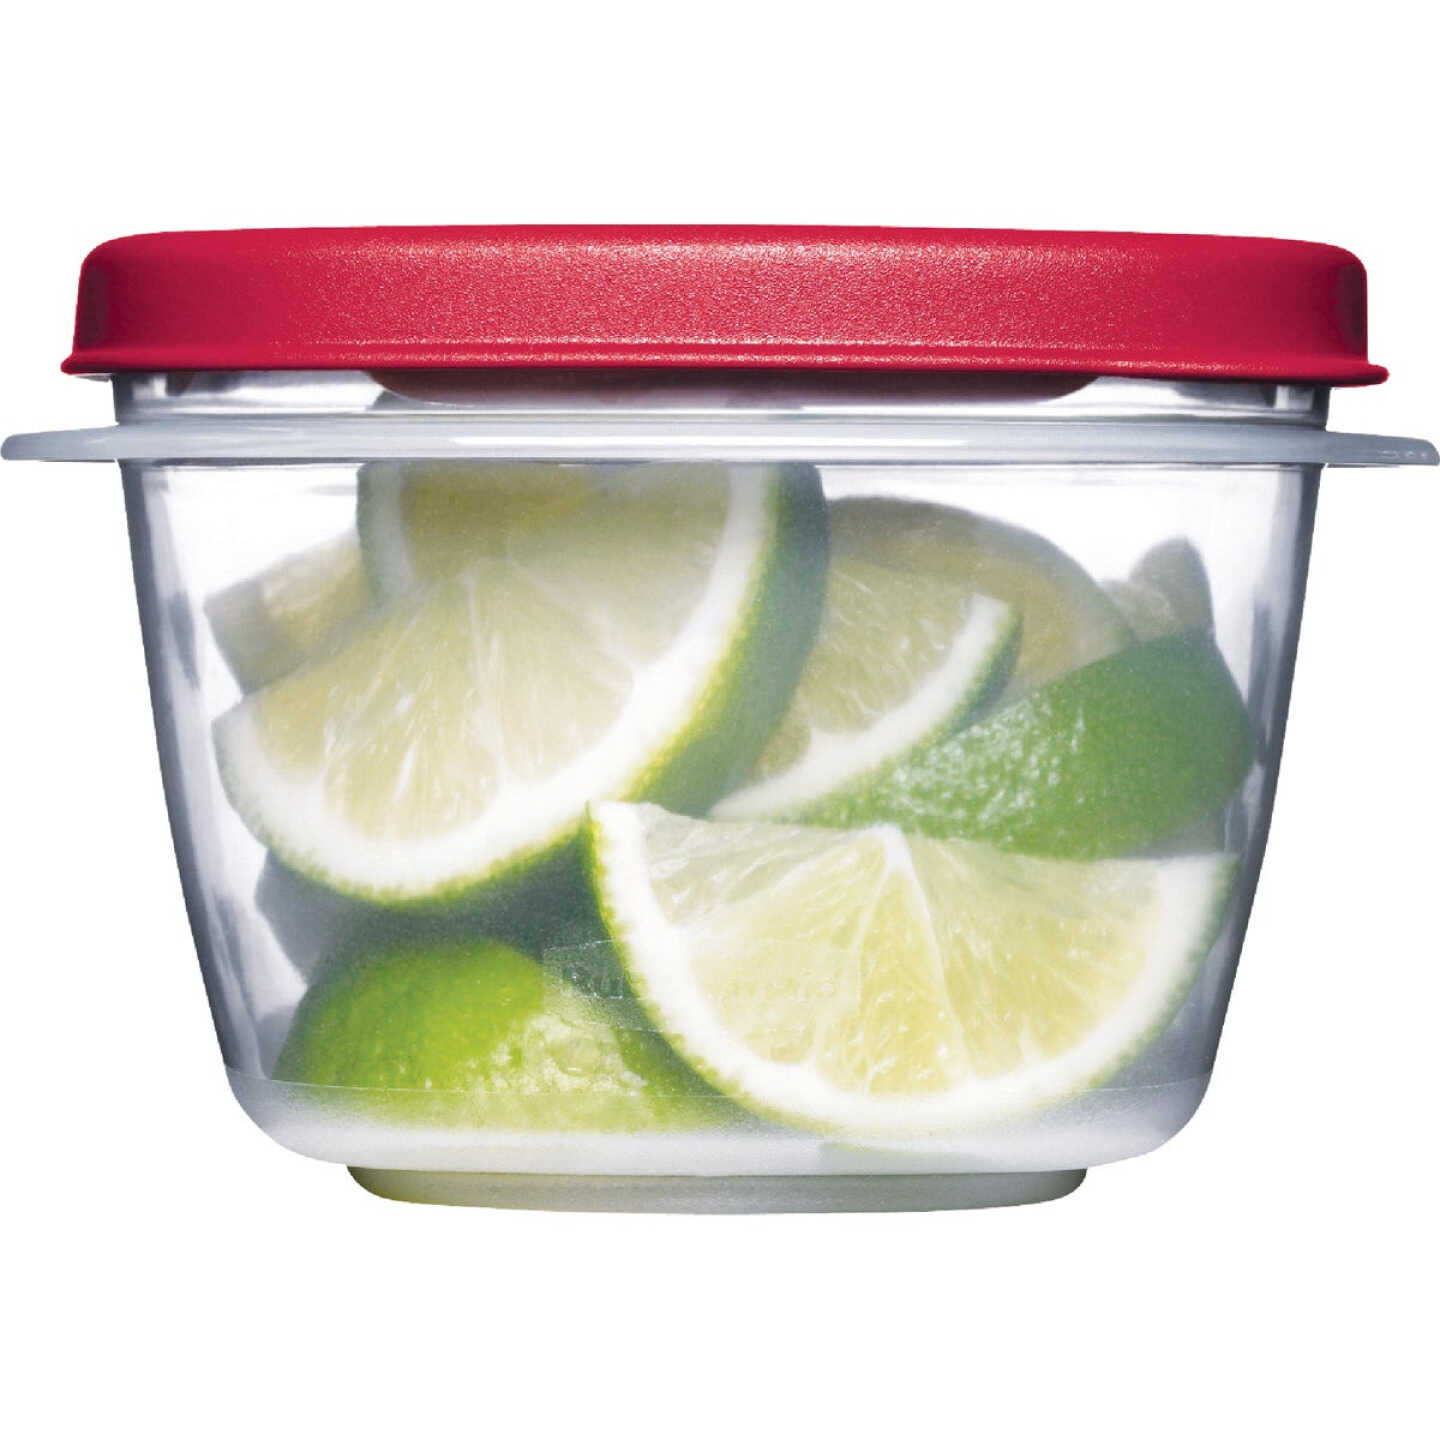 Rubbermaid Easy Find Lids Container, 1.5 Gallon